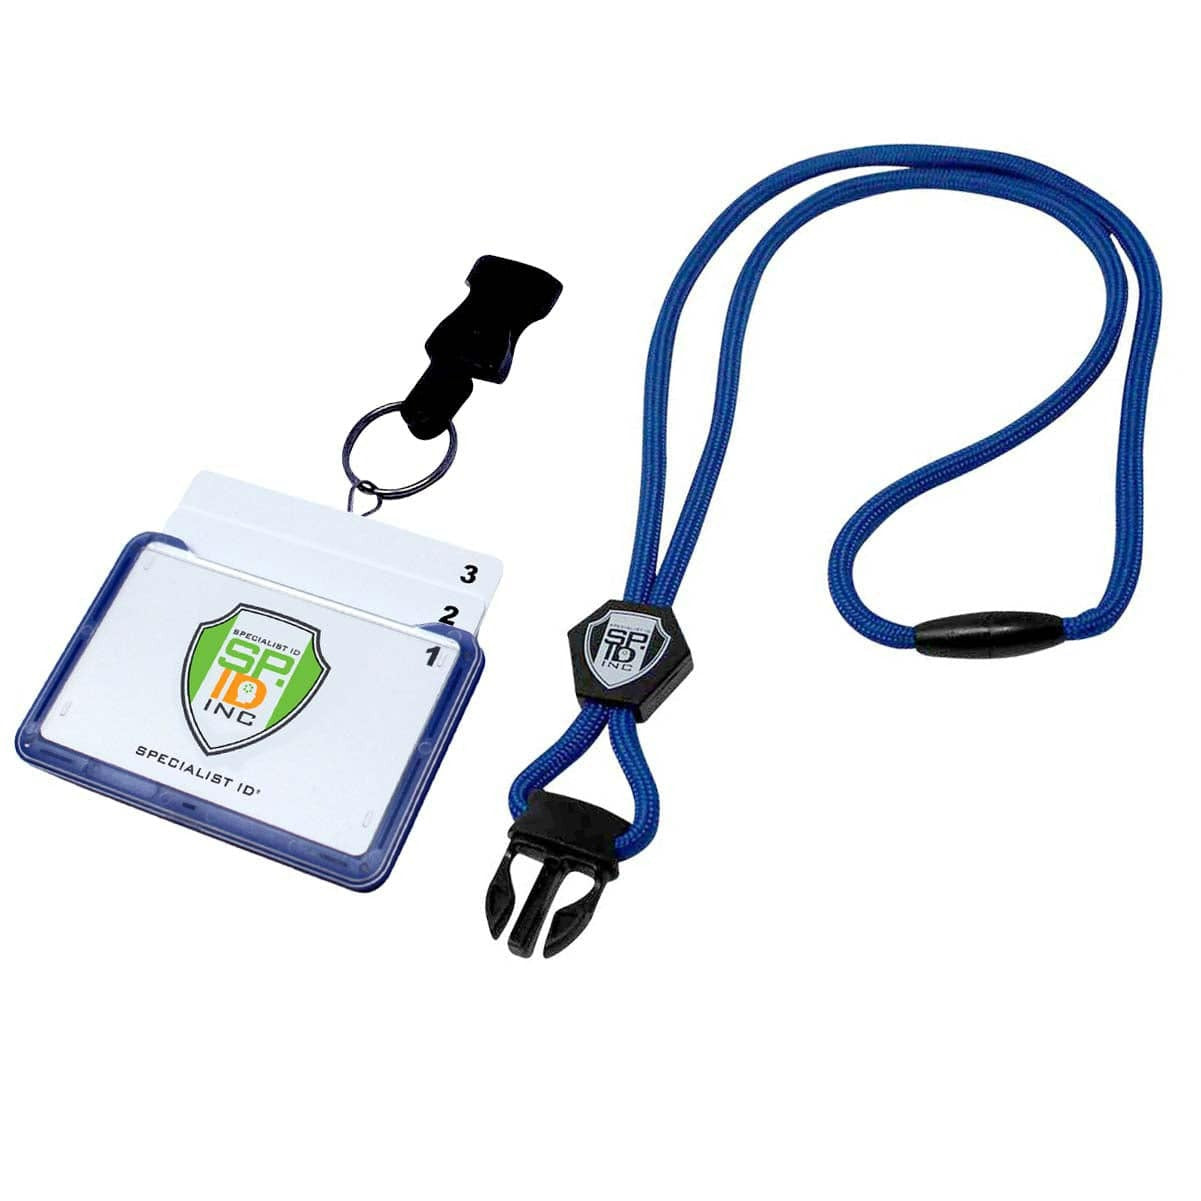 ID Specialists Web Store. Clip-On Badge Holder